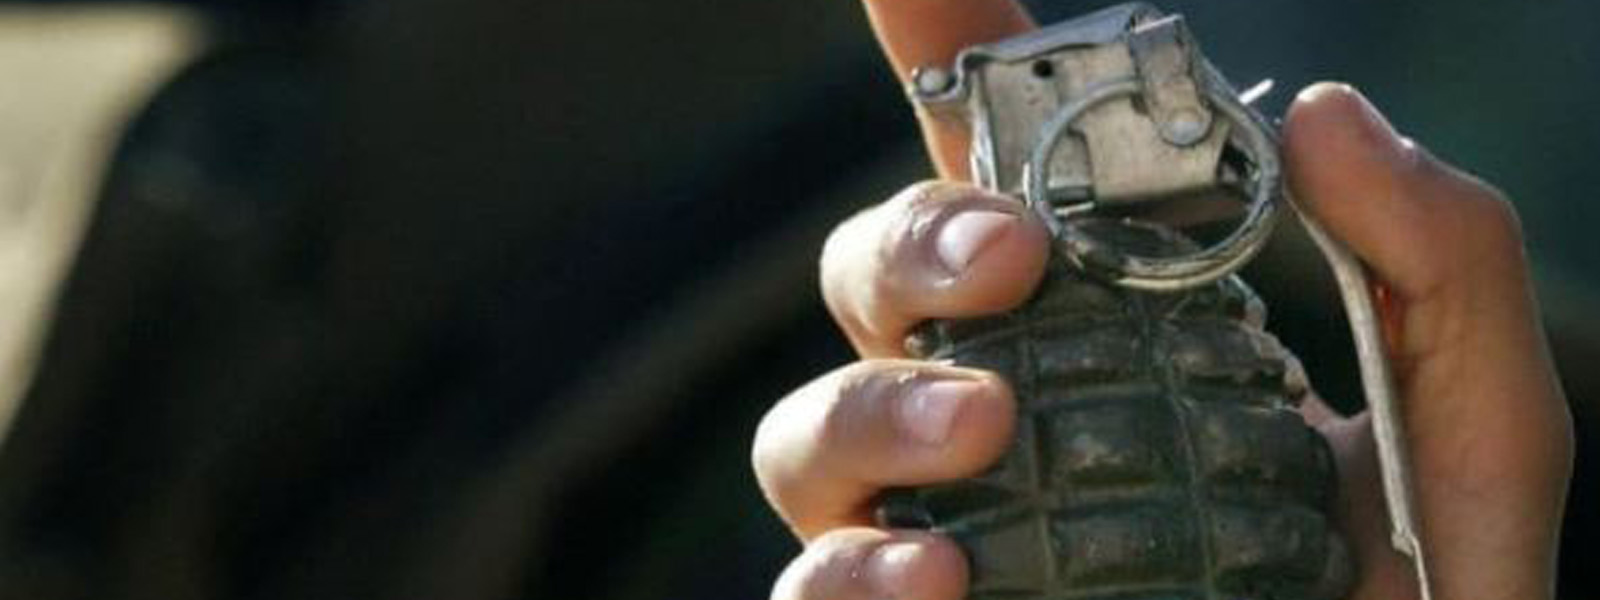 Suspect arrested with hand grenade